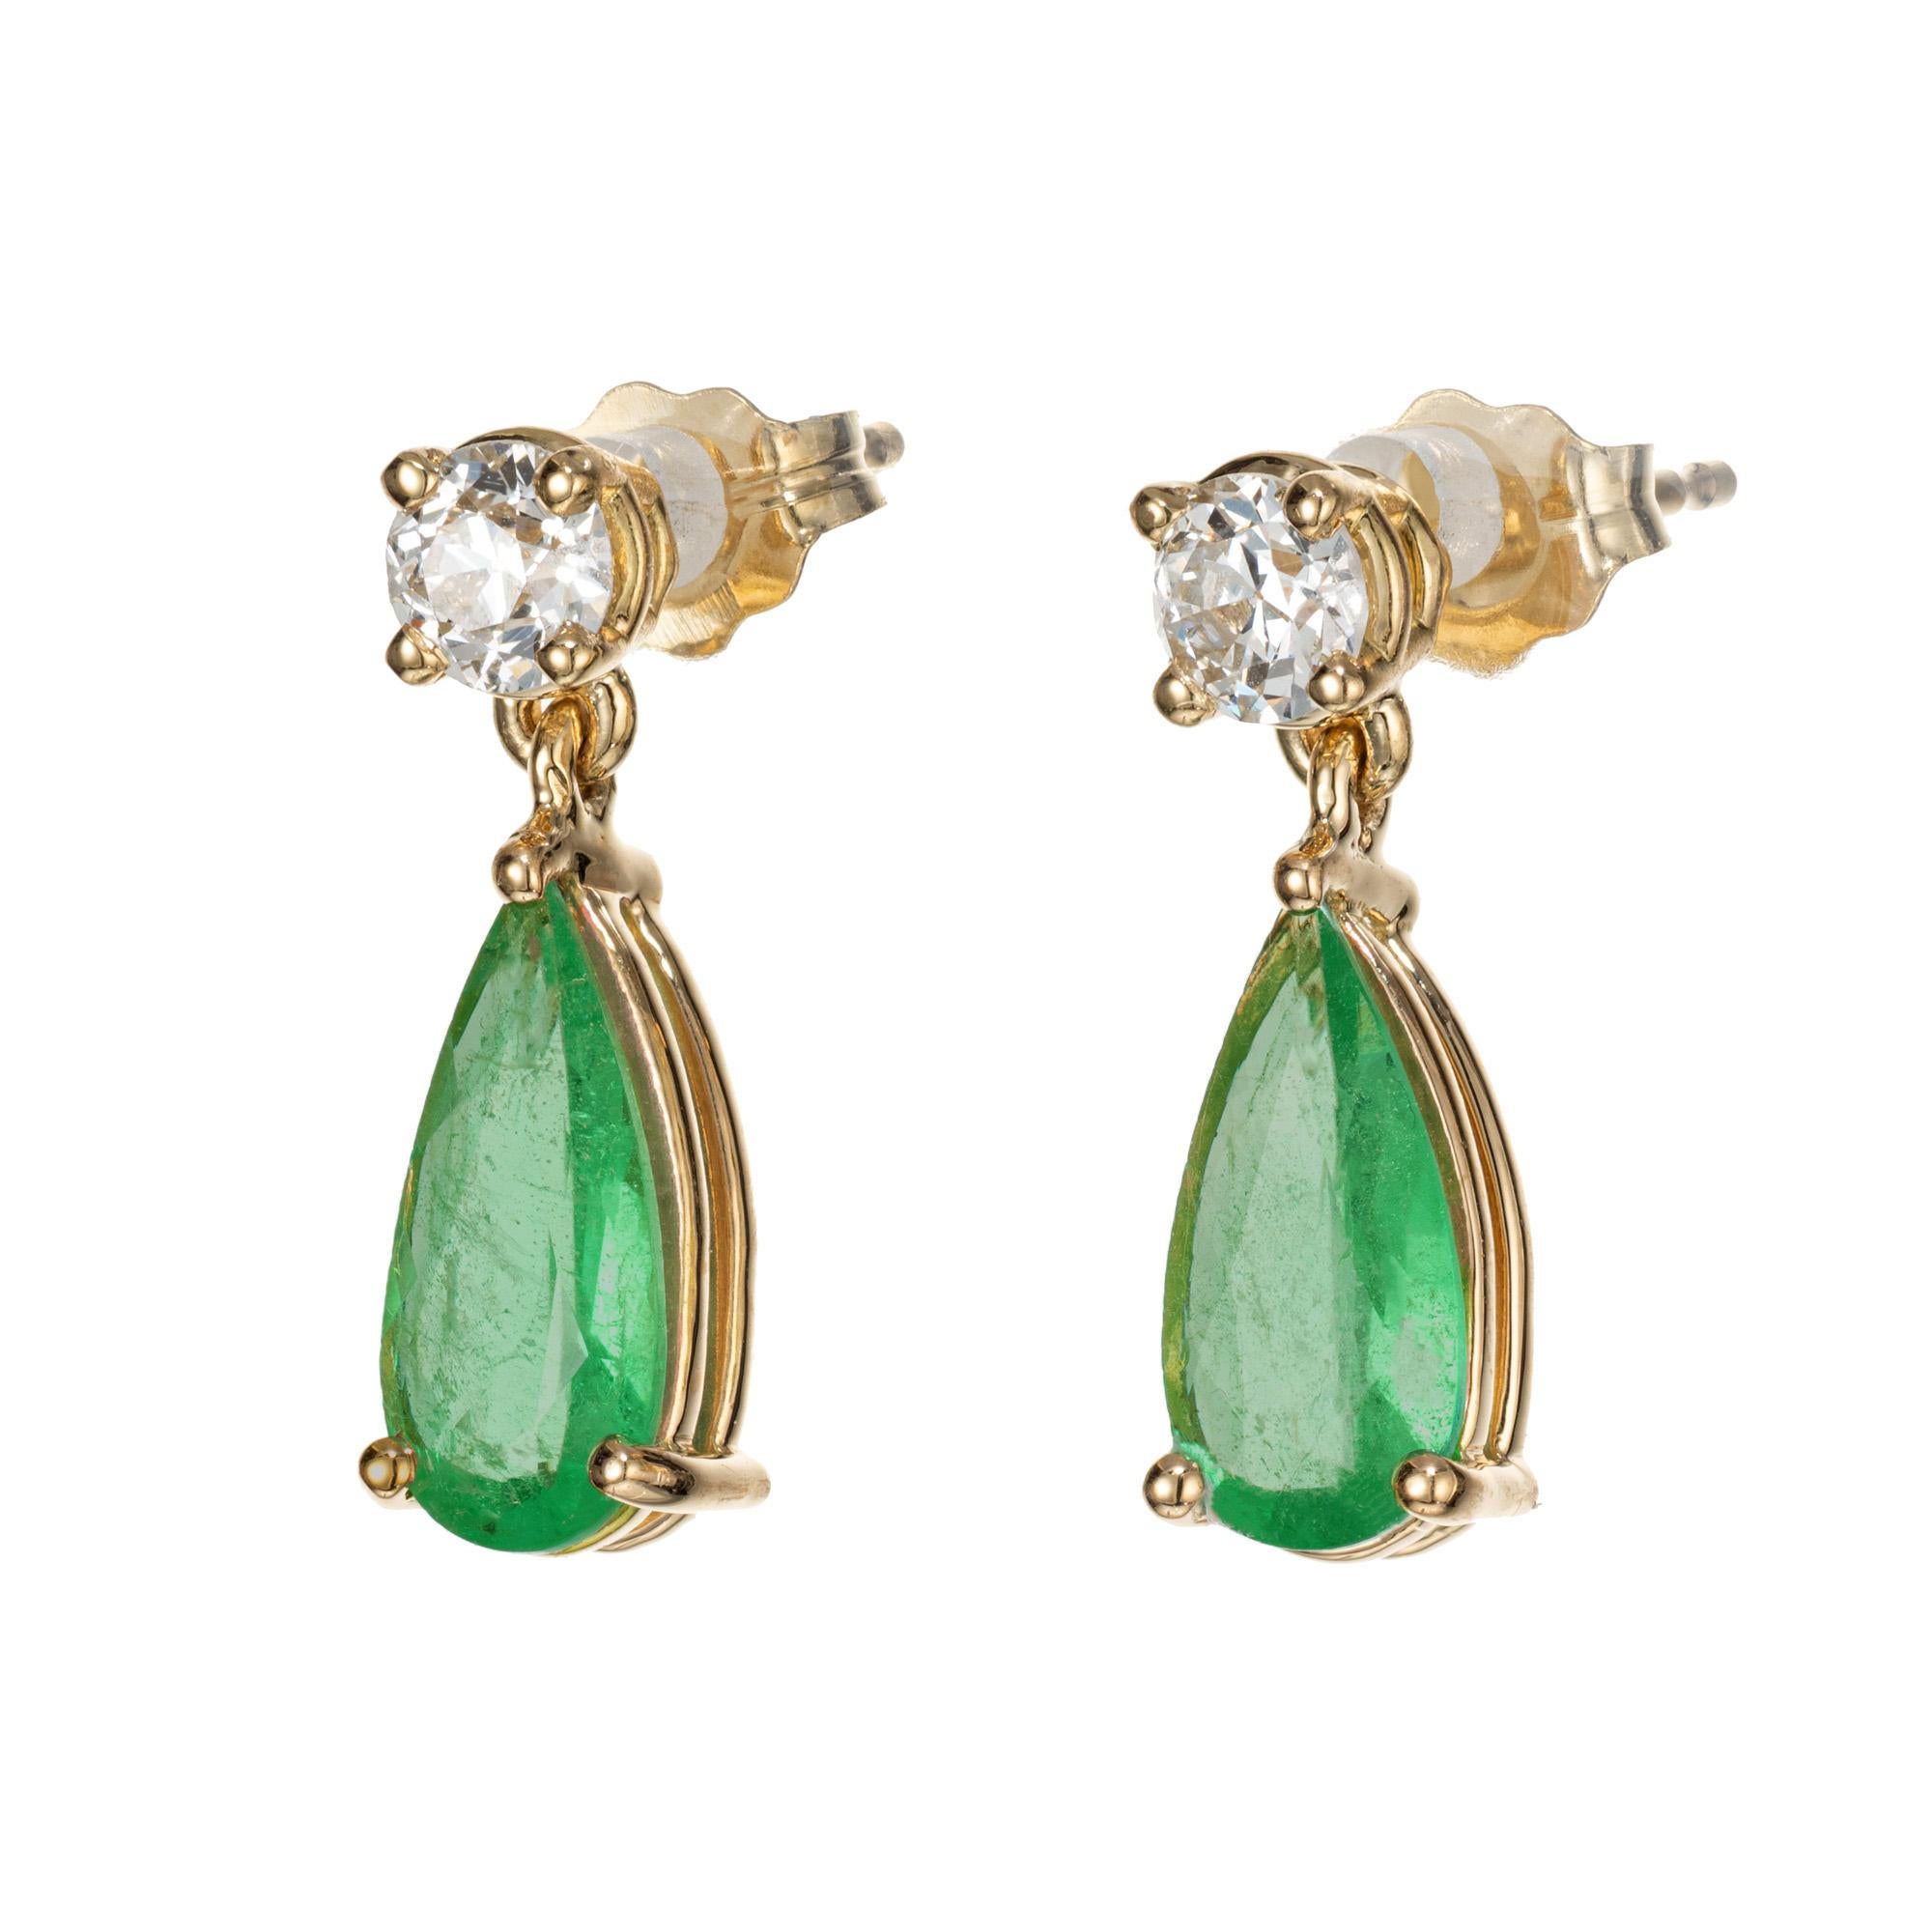 GIA certified emerald diamond dangle earrings. GIA certified pear shaped green emeralds, each with one round diamond above them. Designed and crafted in the Peter Suchy Workshop.

2 pear shape green emeralds, MI approx. 1.21cts GIA certificate #